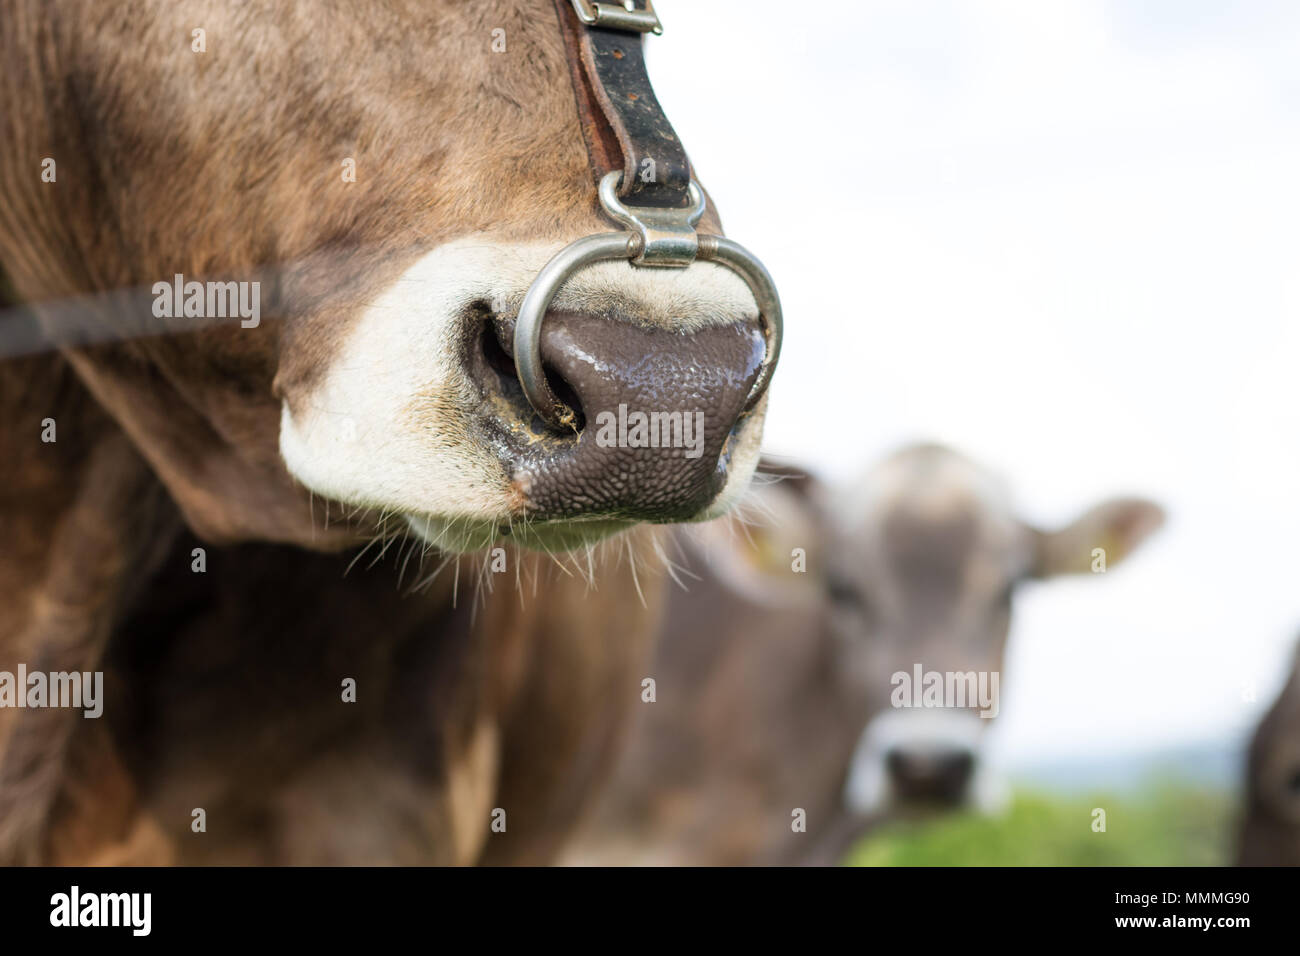 close up of snout of cow with nose ring Stock Photo